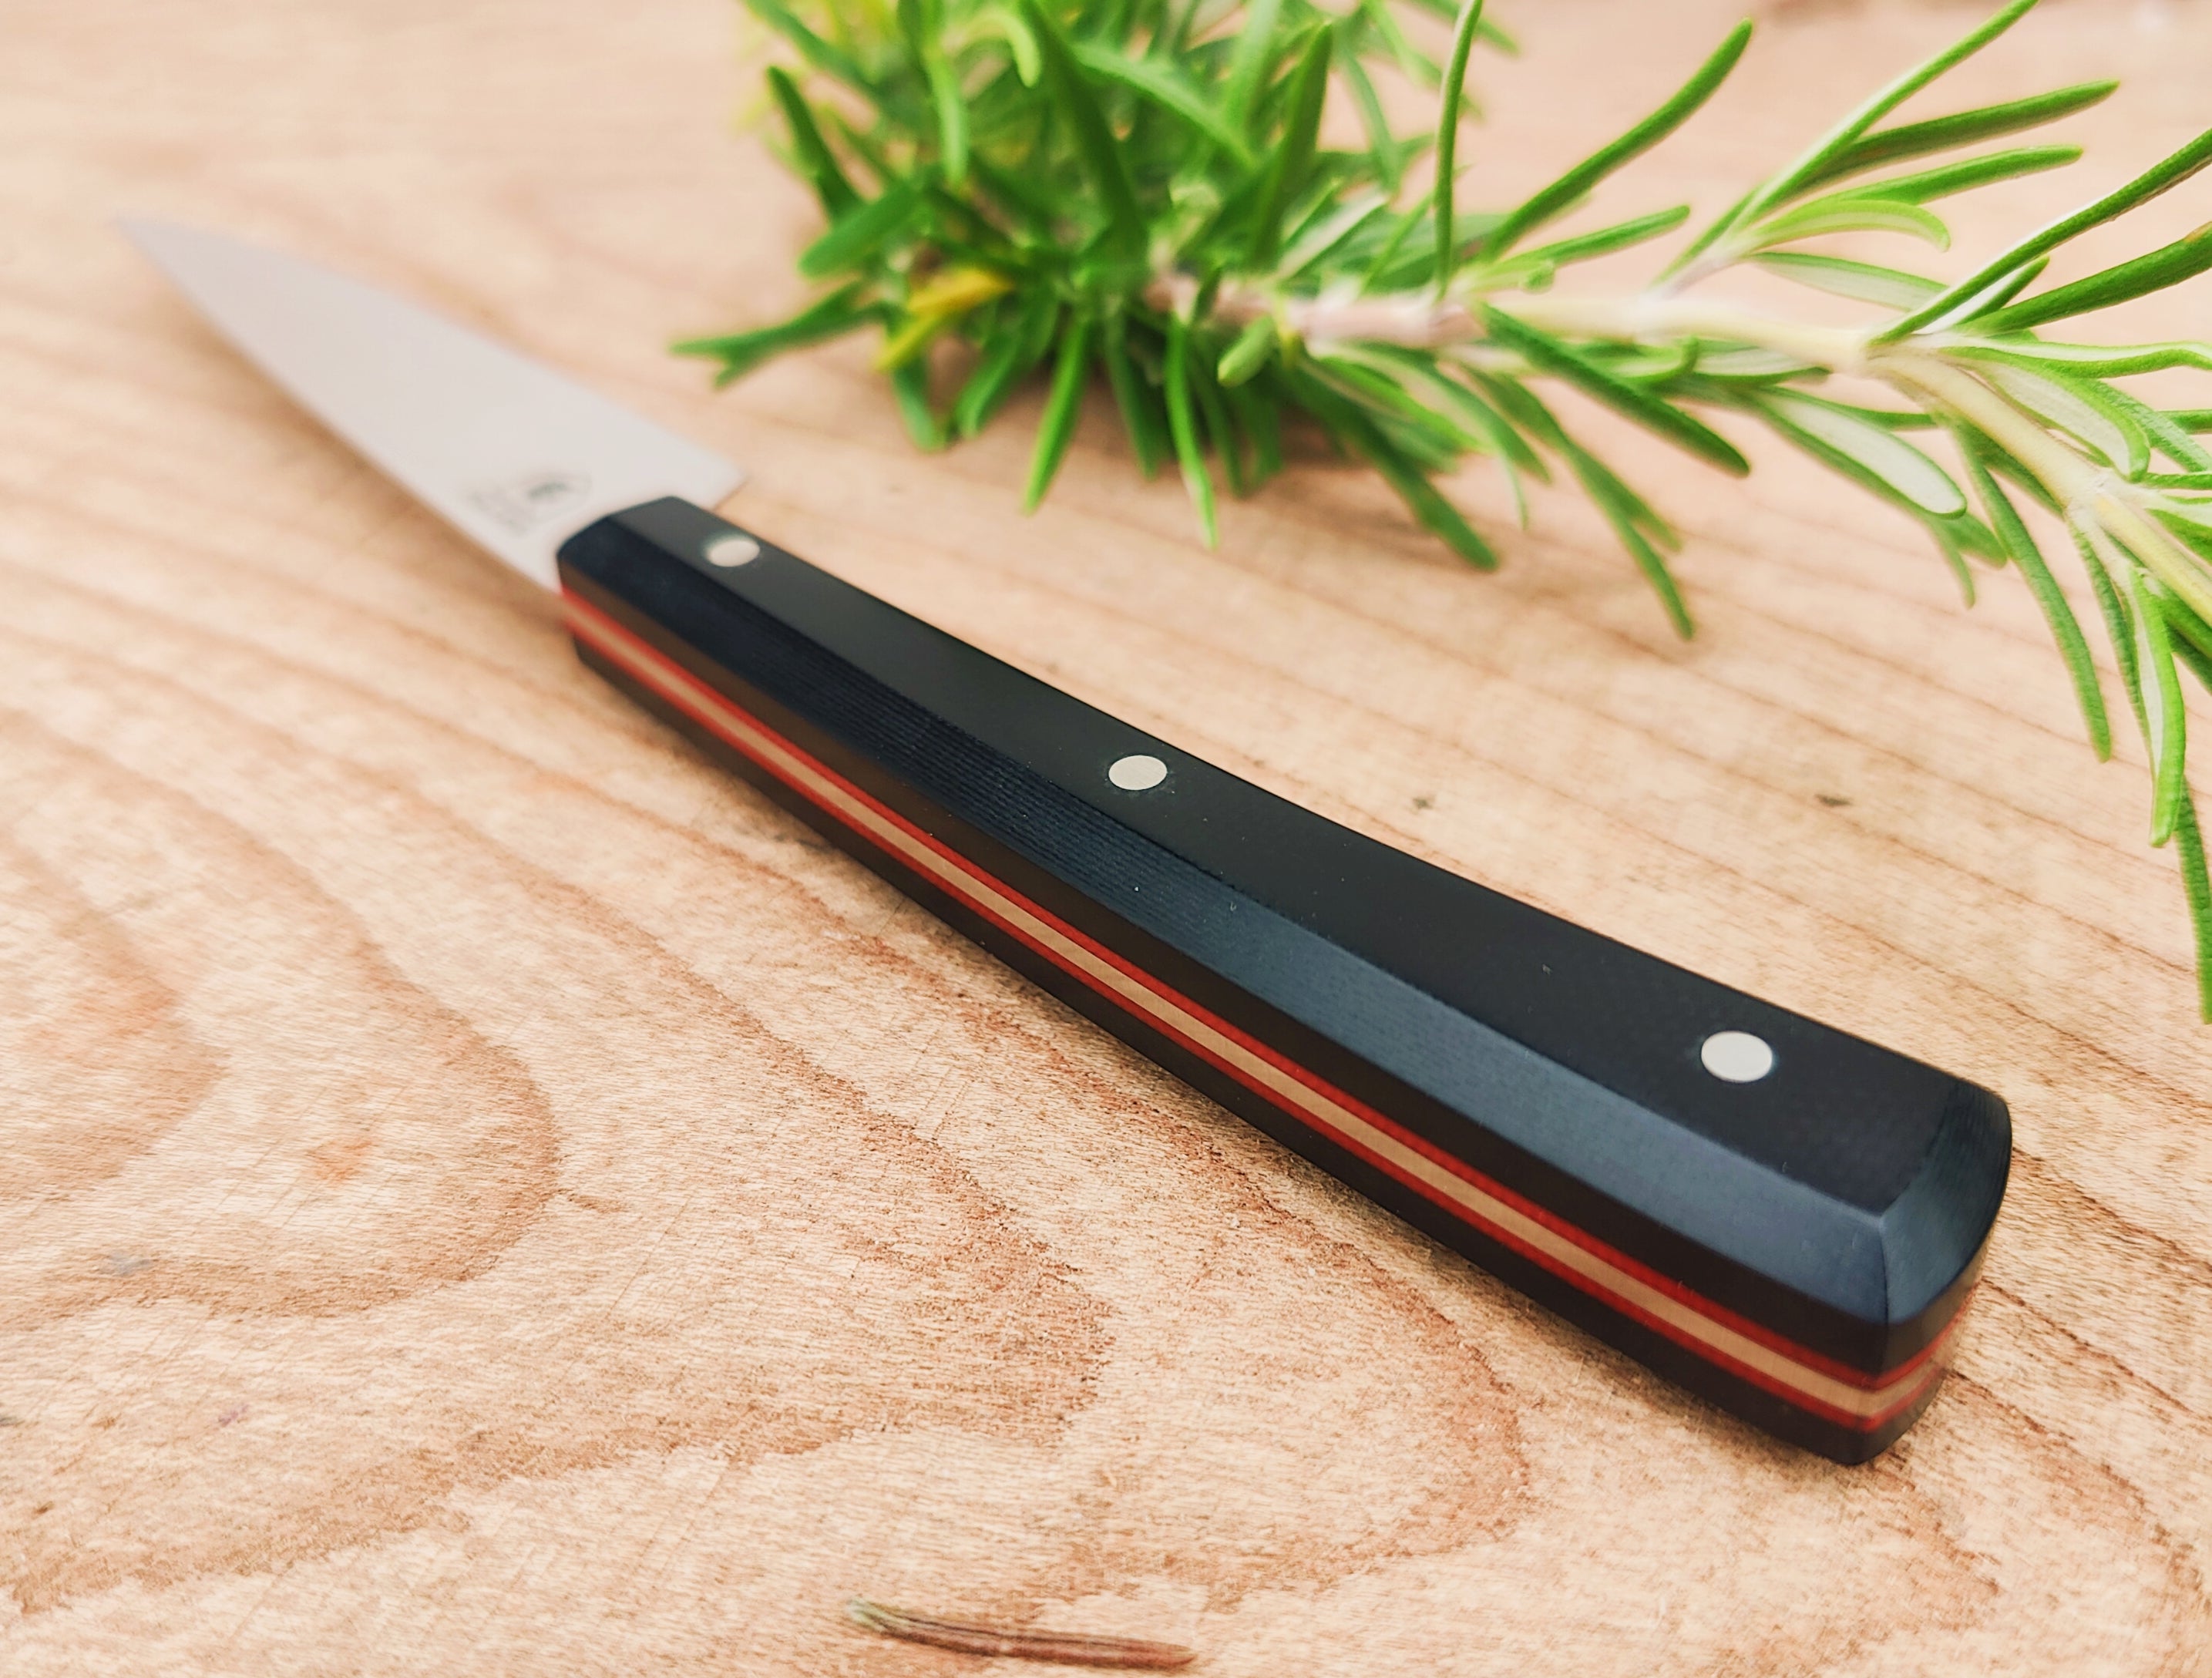 Pearing knife